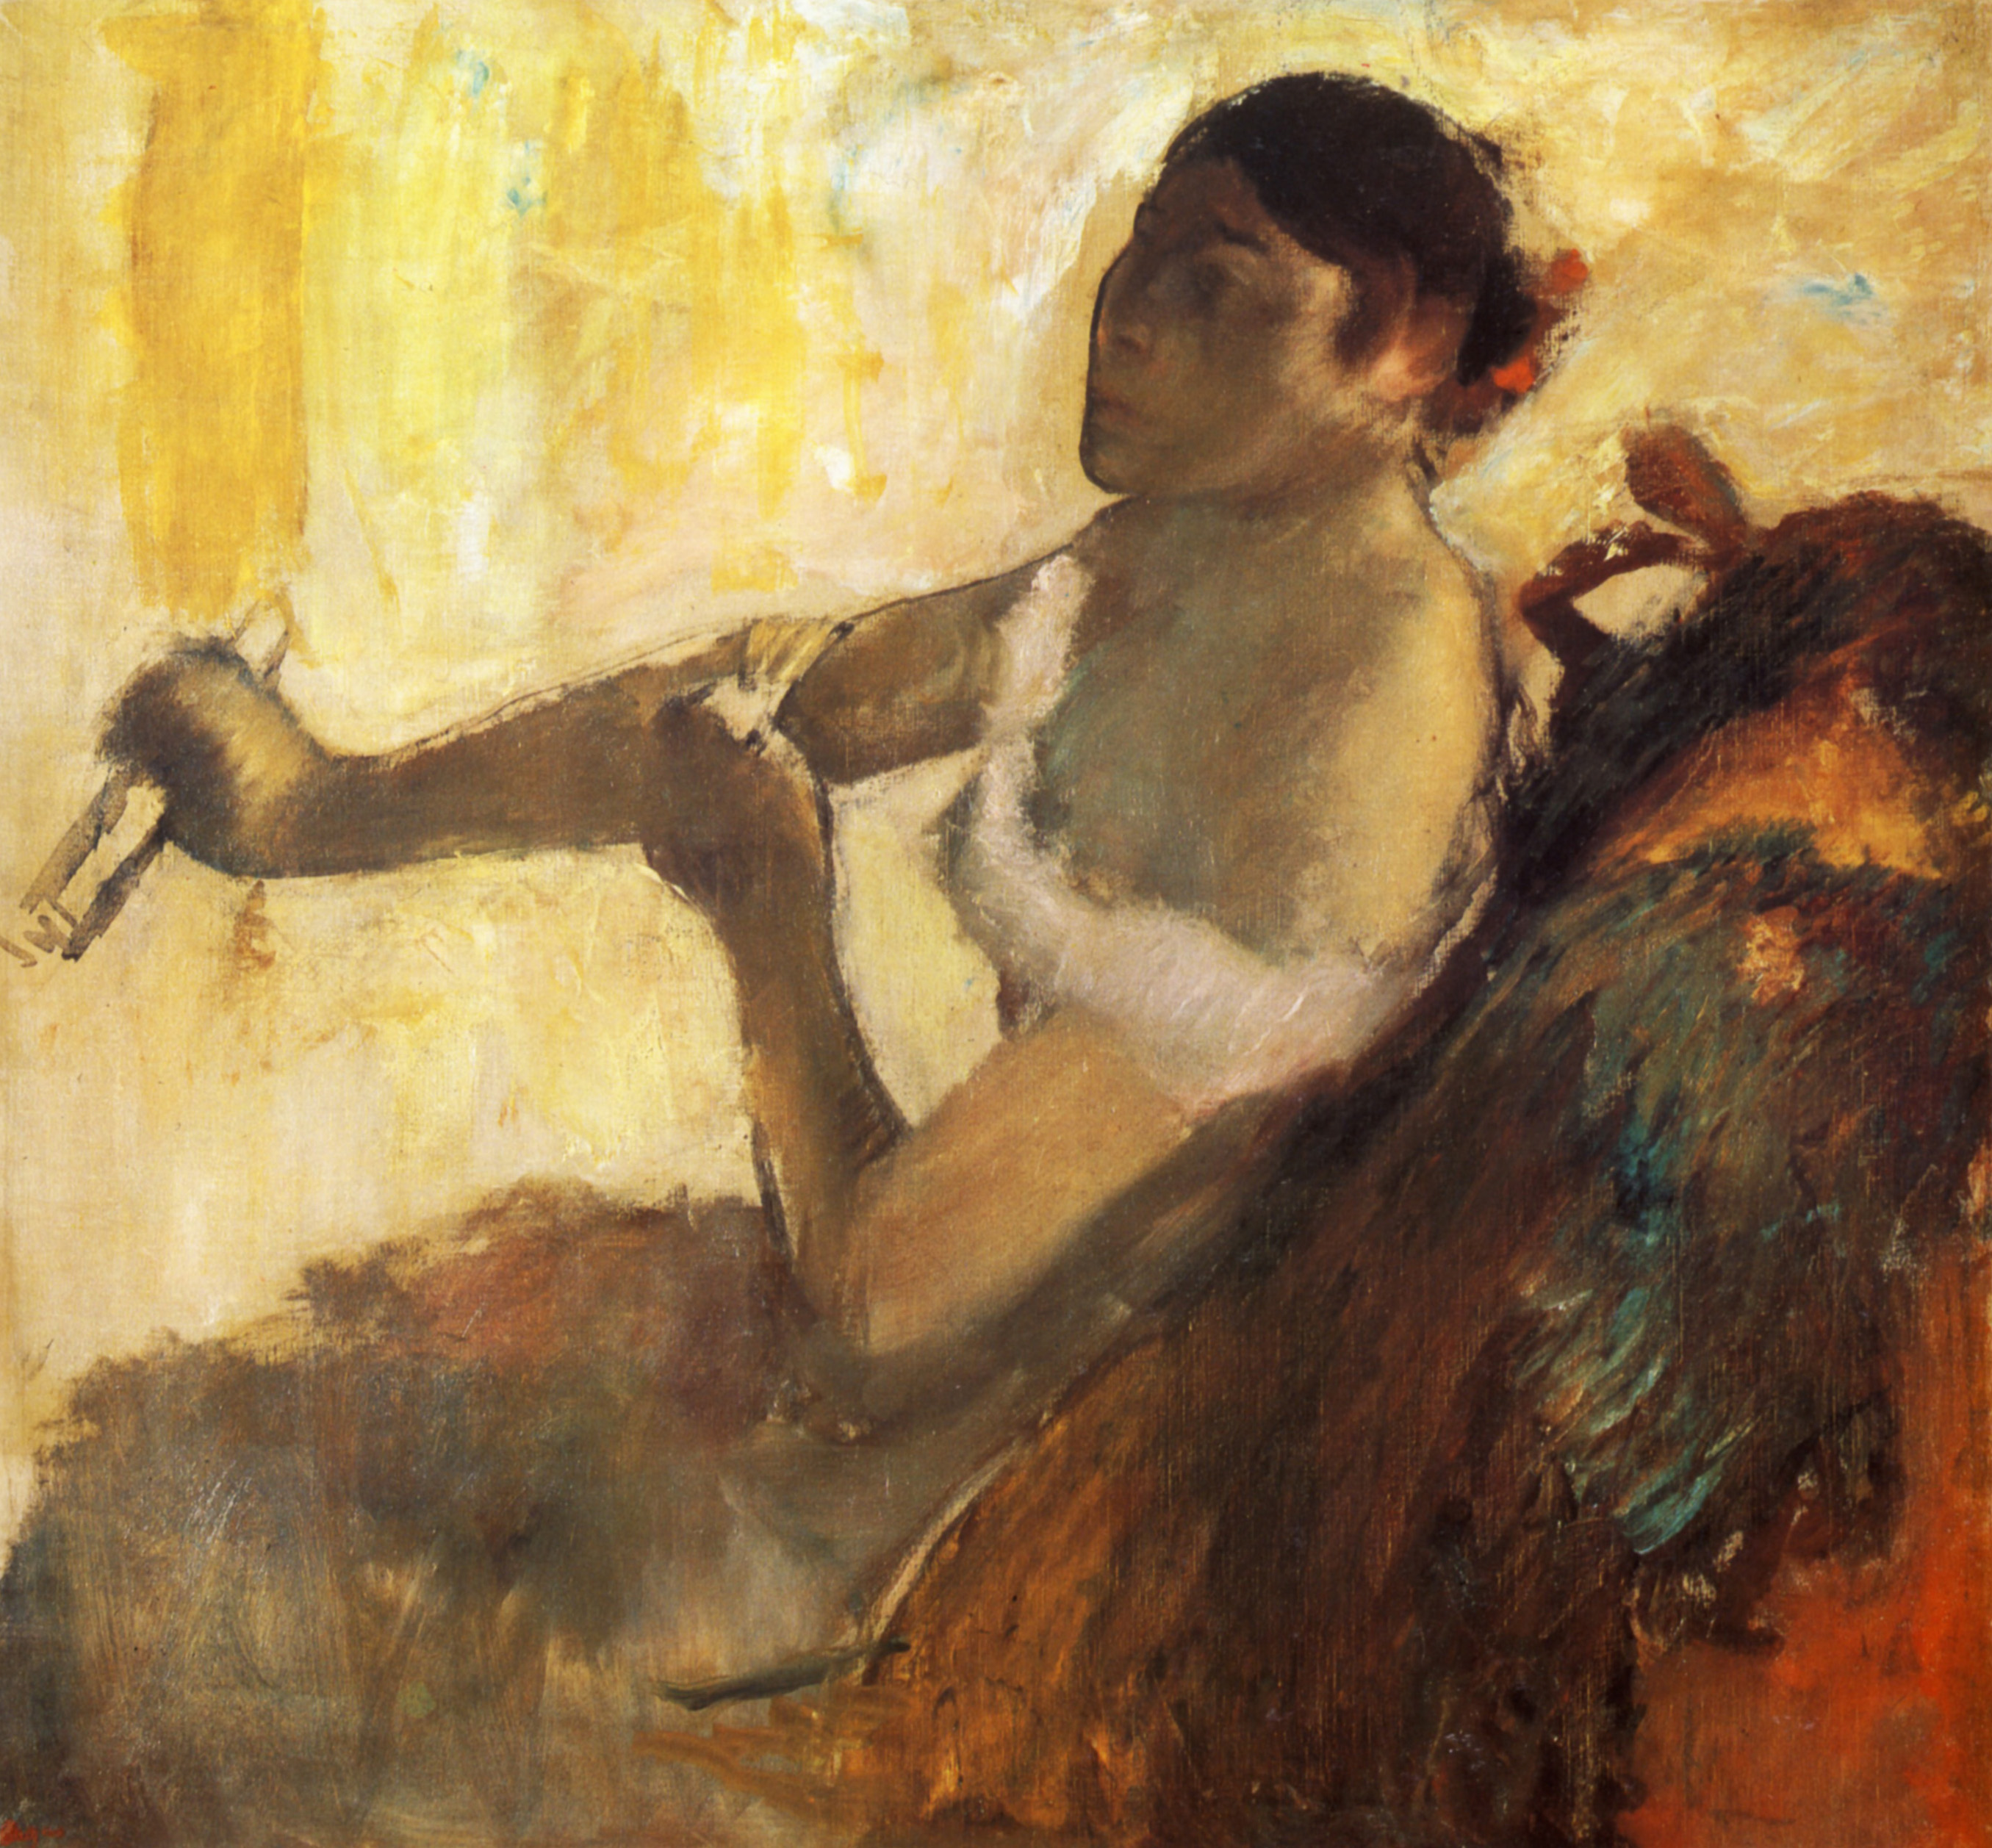 Seated Woman pulling her glove. Rose Caron 1890